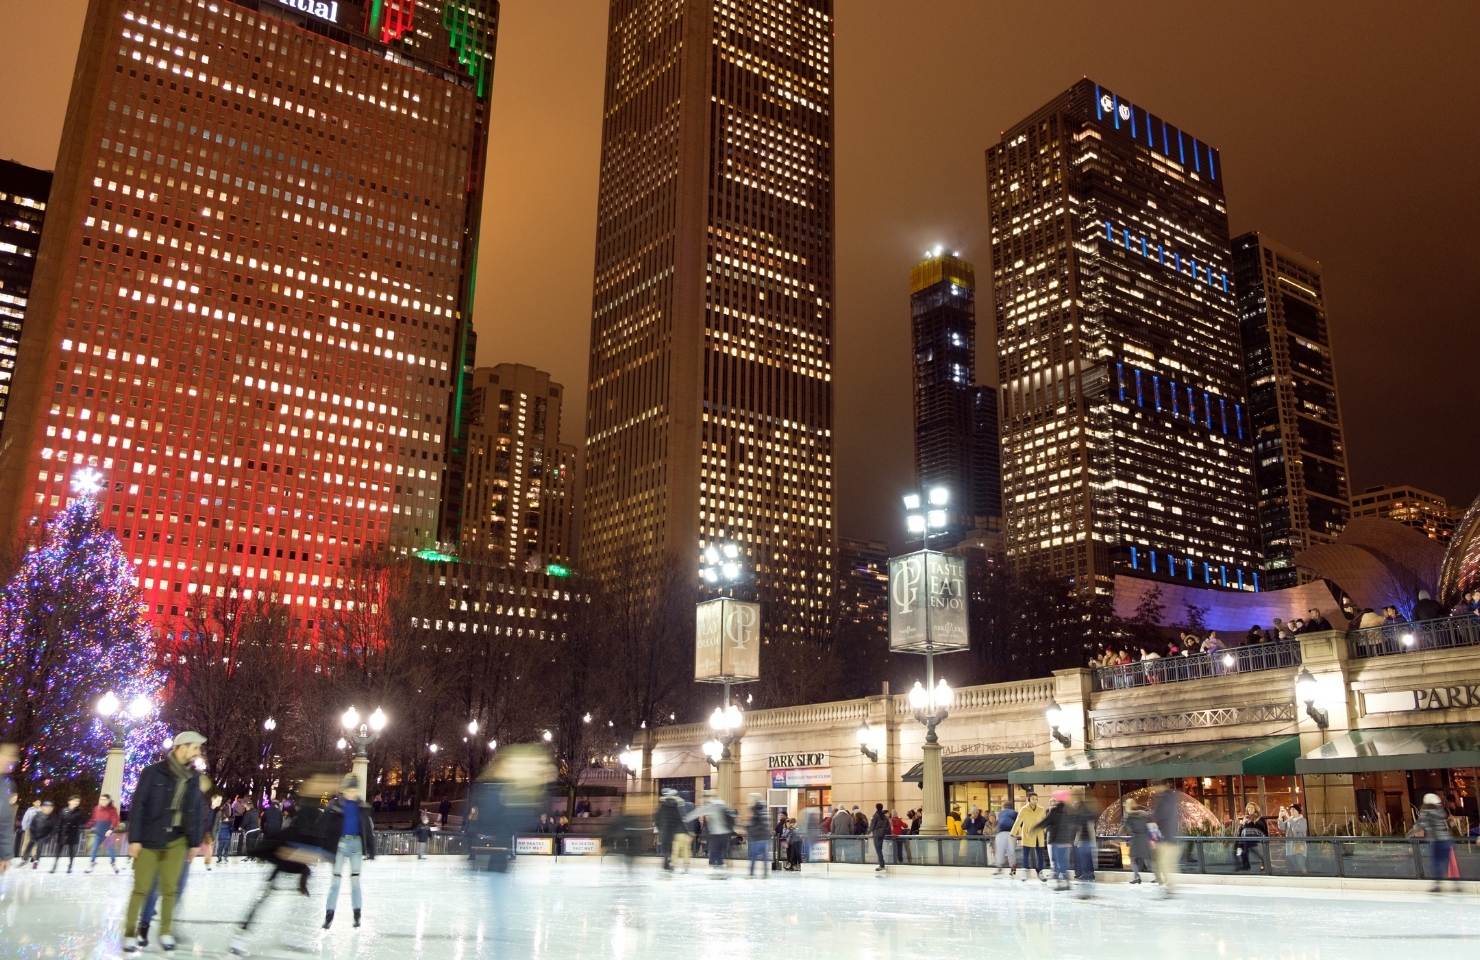 people ice skating at the mccormick tribune plaza chicago